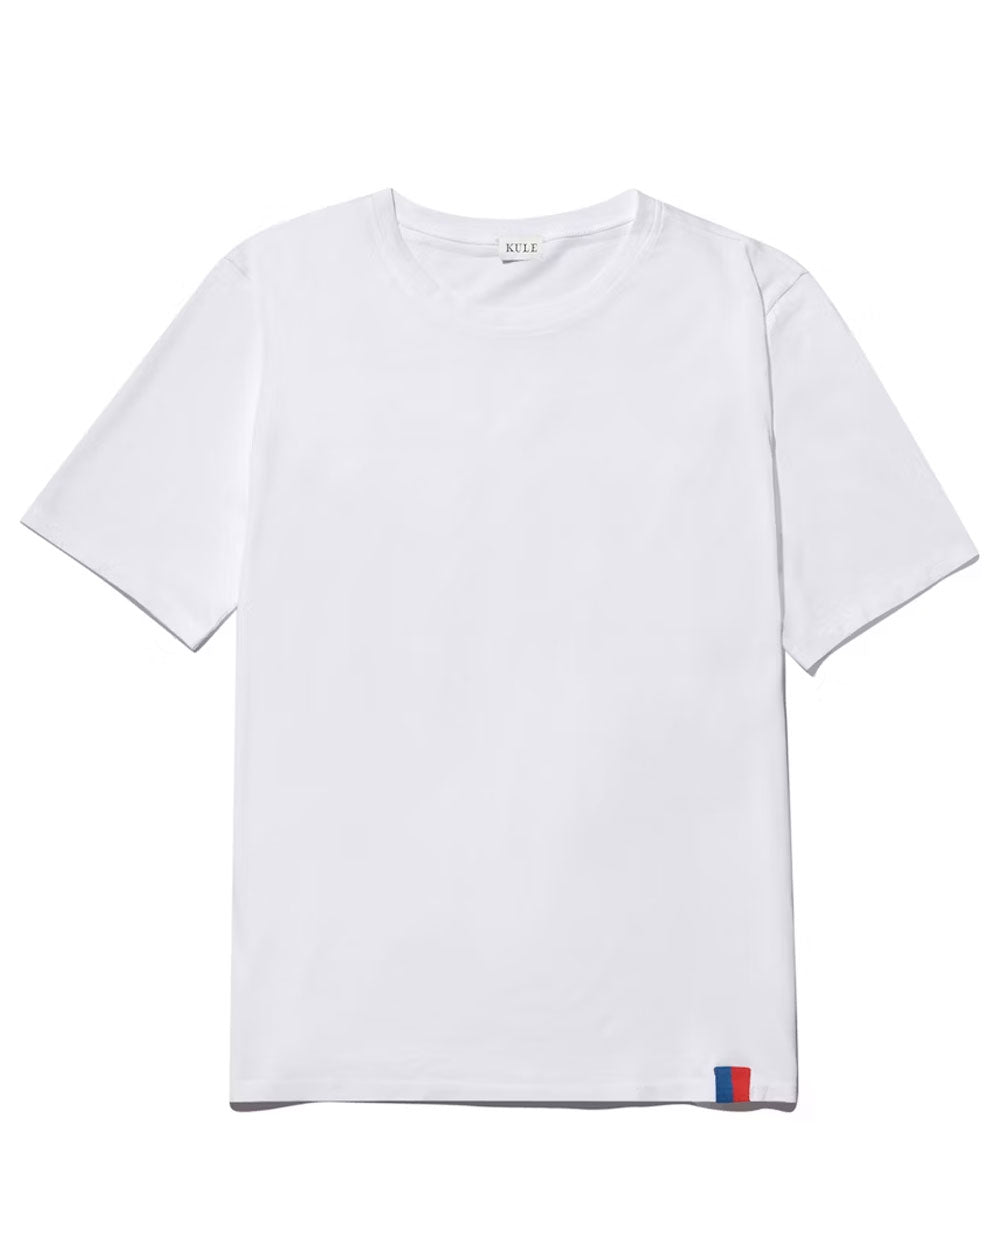 The Modern Tee in White